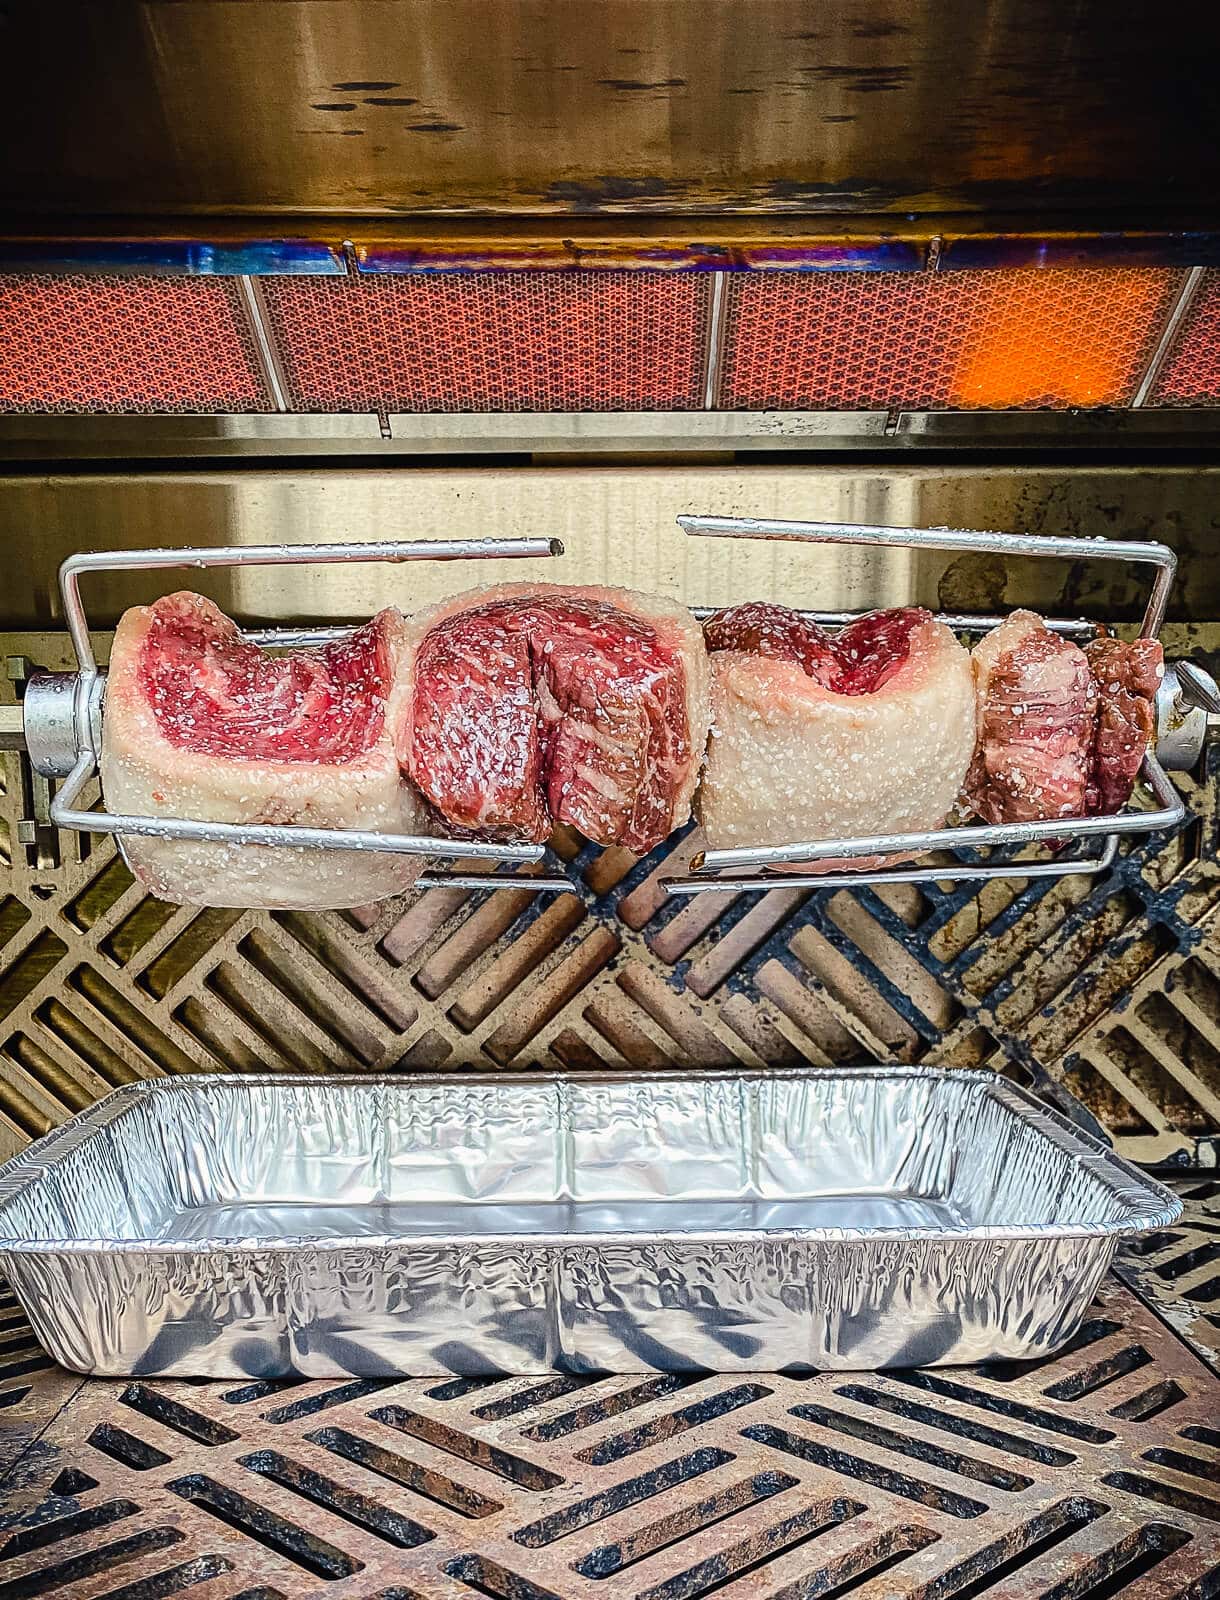 Premium PSD  Steak rotisserie at the steakhouse sliced picanha picanha